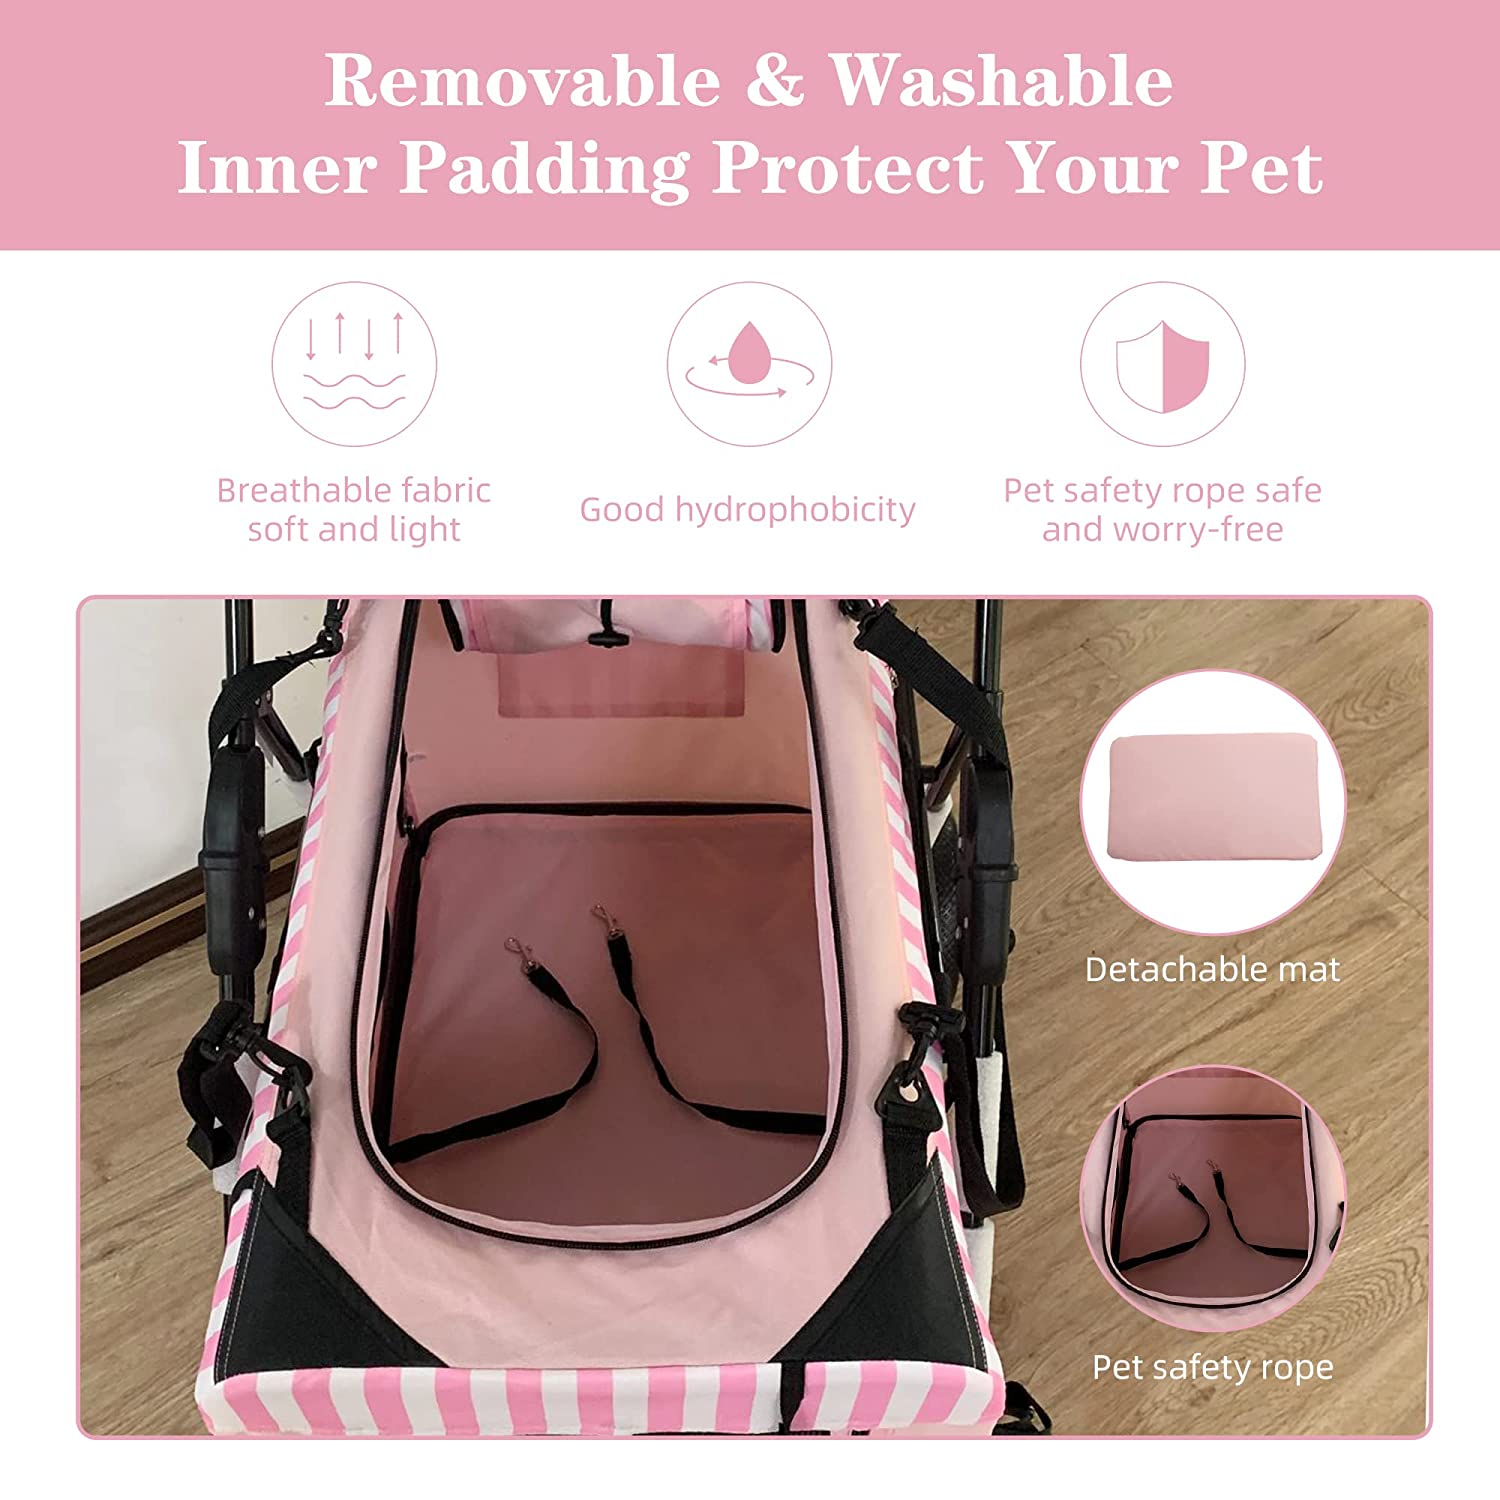 3-in-1 Folding Pet Stroller Travel Pet Gear Stroller with Detachable Carrier Bag & Water Cup Holder, Pink